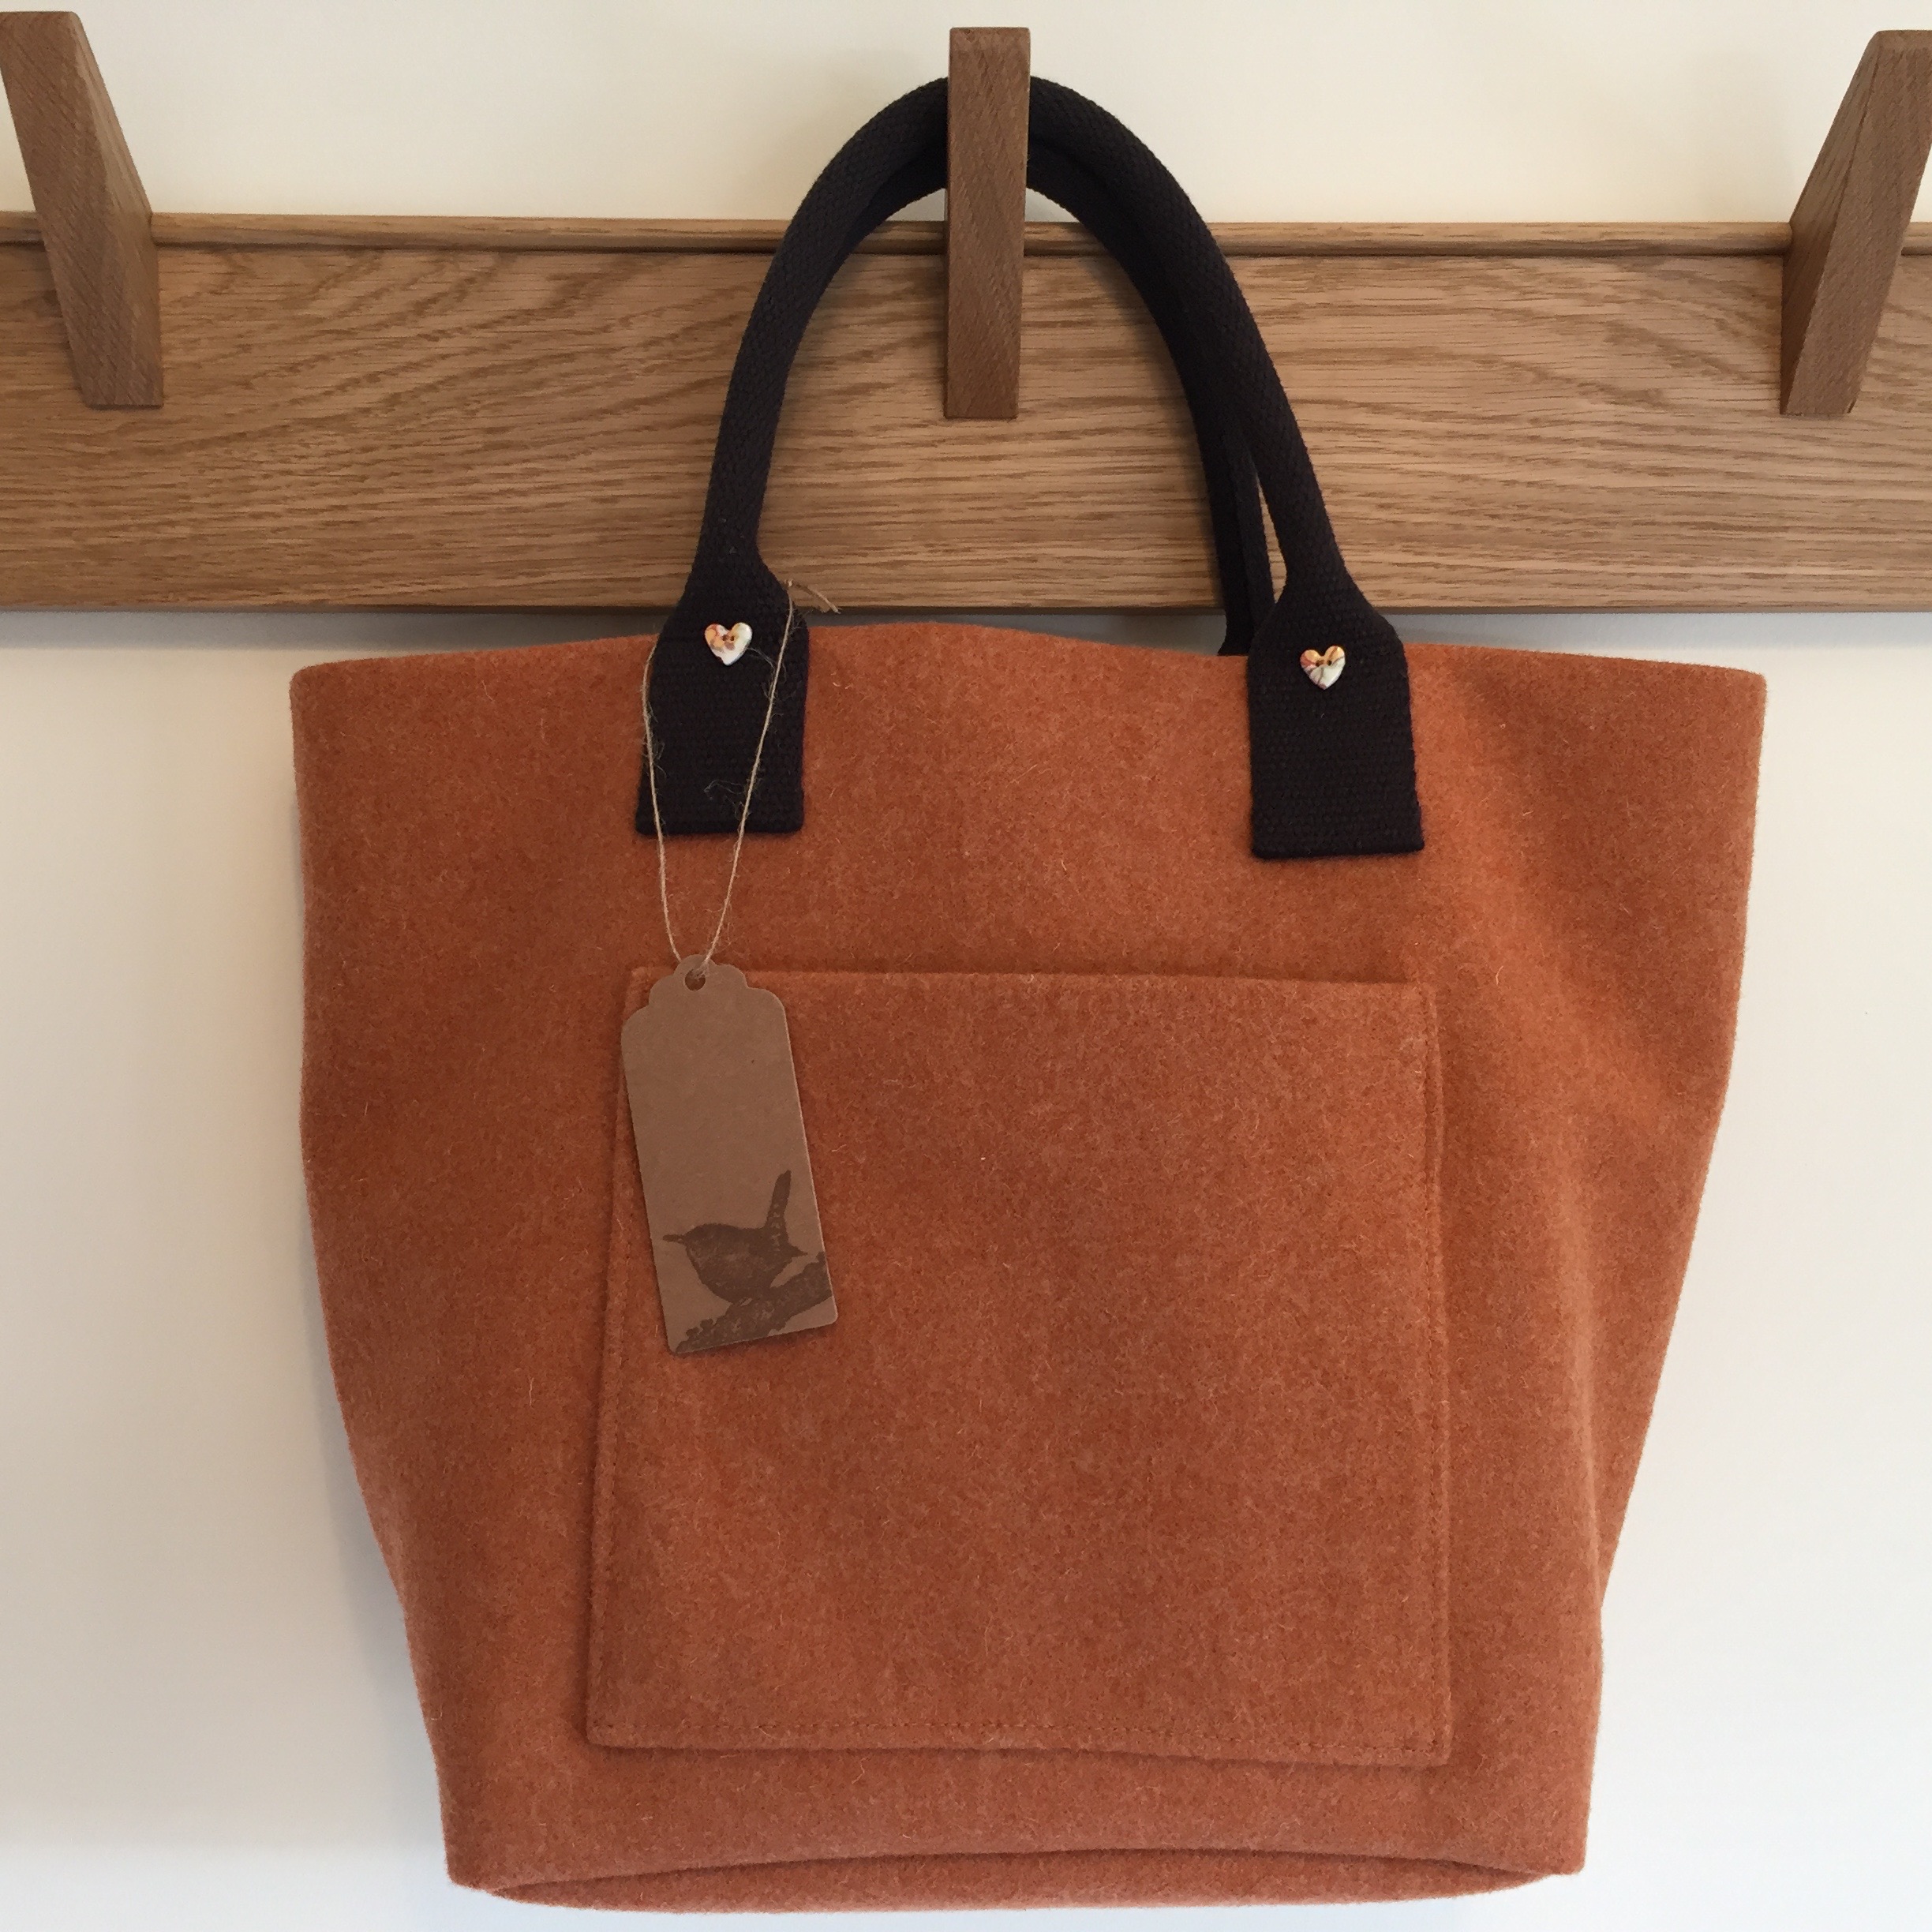 Wool Tote in Burnt Orange with Front Pocket